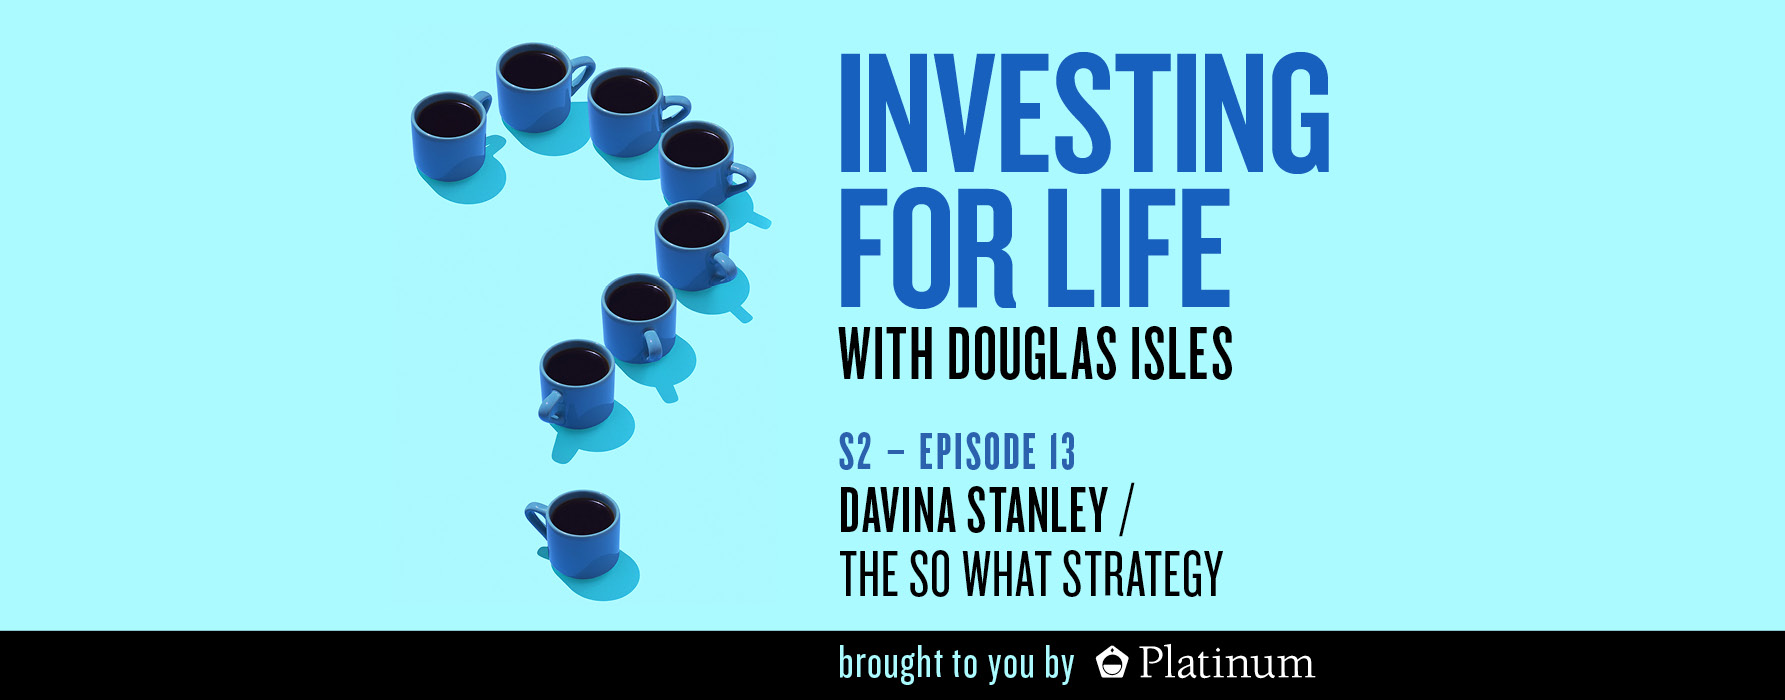 Investing for Life Podcast - Davina Stanley, The So What Strategy